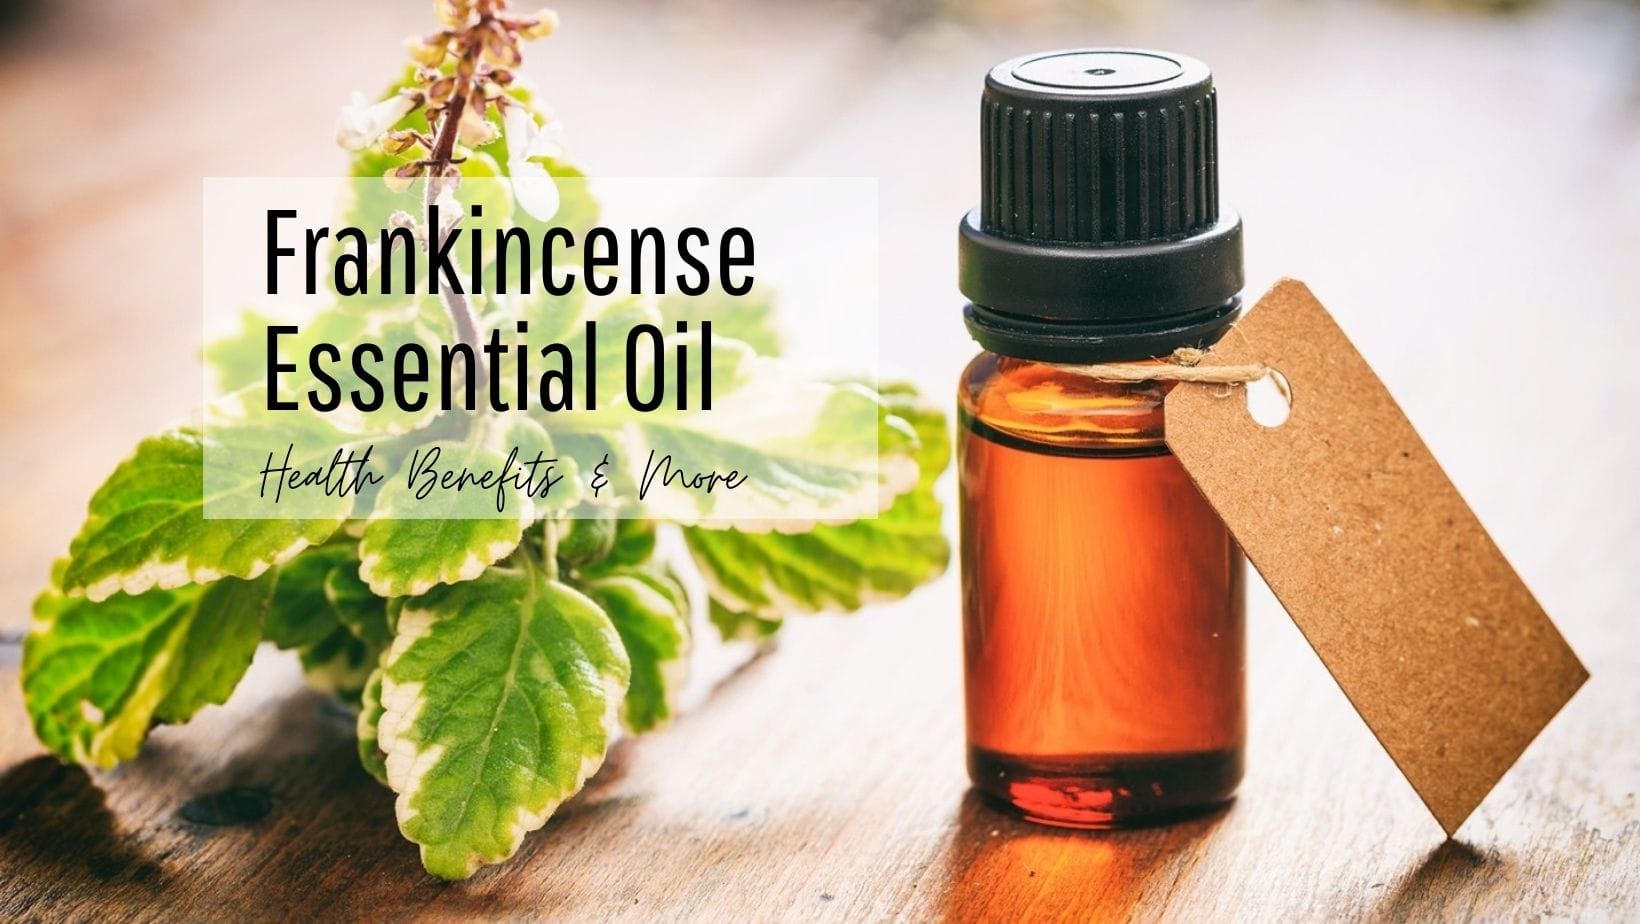 Frankincense Essential Oil: 5 Amazing Health Benefits of This Ayurvedic Oil